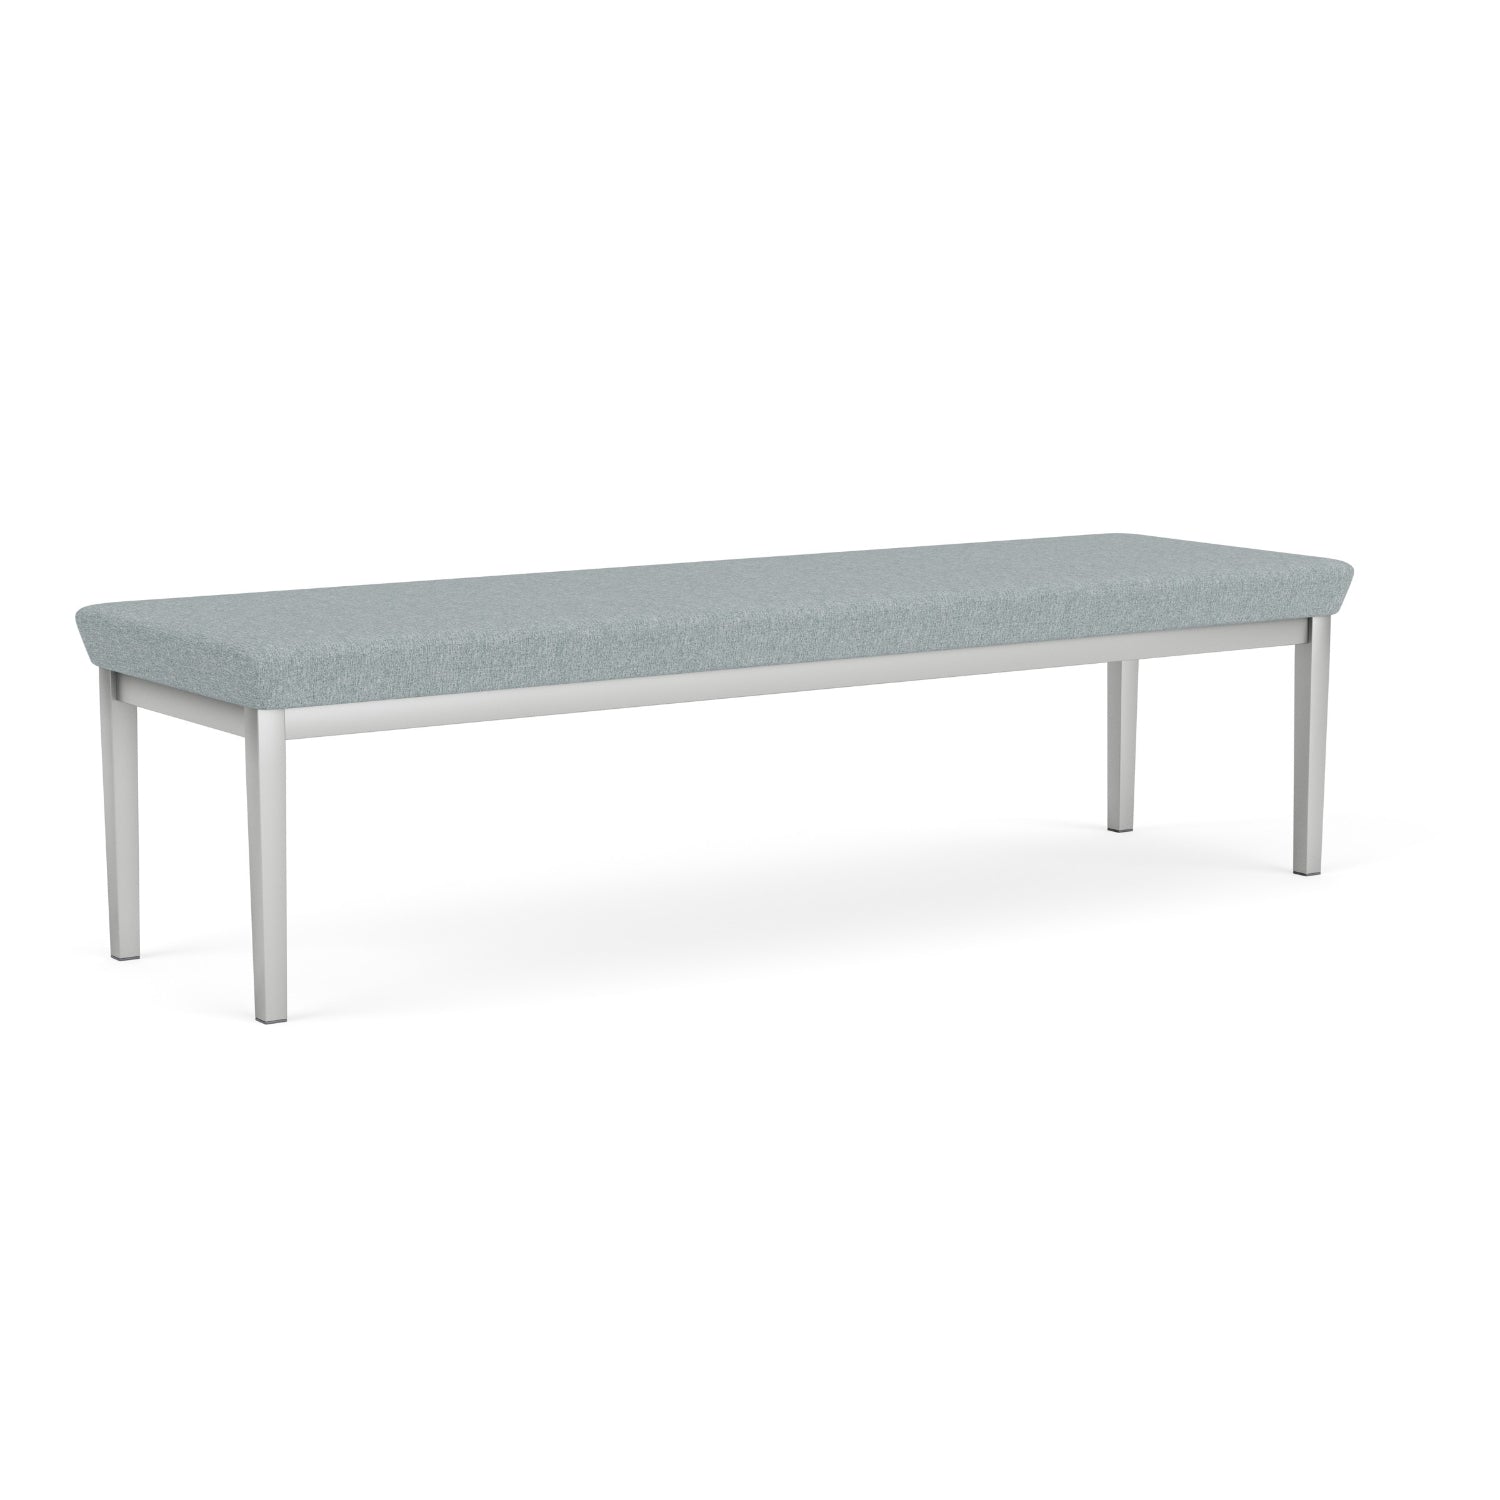 Amherst Steel Collection Reception Seating, 3 Seat Bench, Healthcare Vinyl Upholstery, FREE SHIPPING